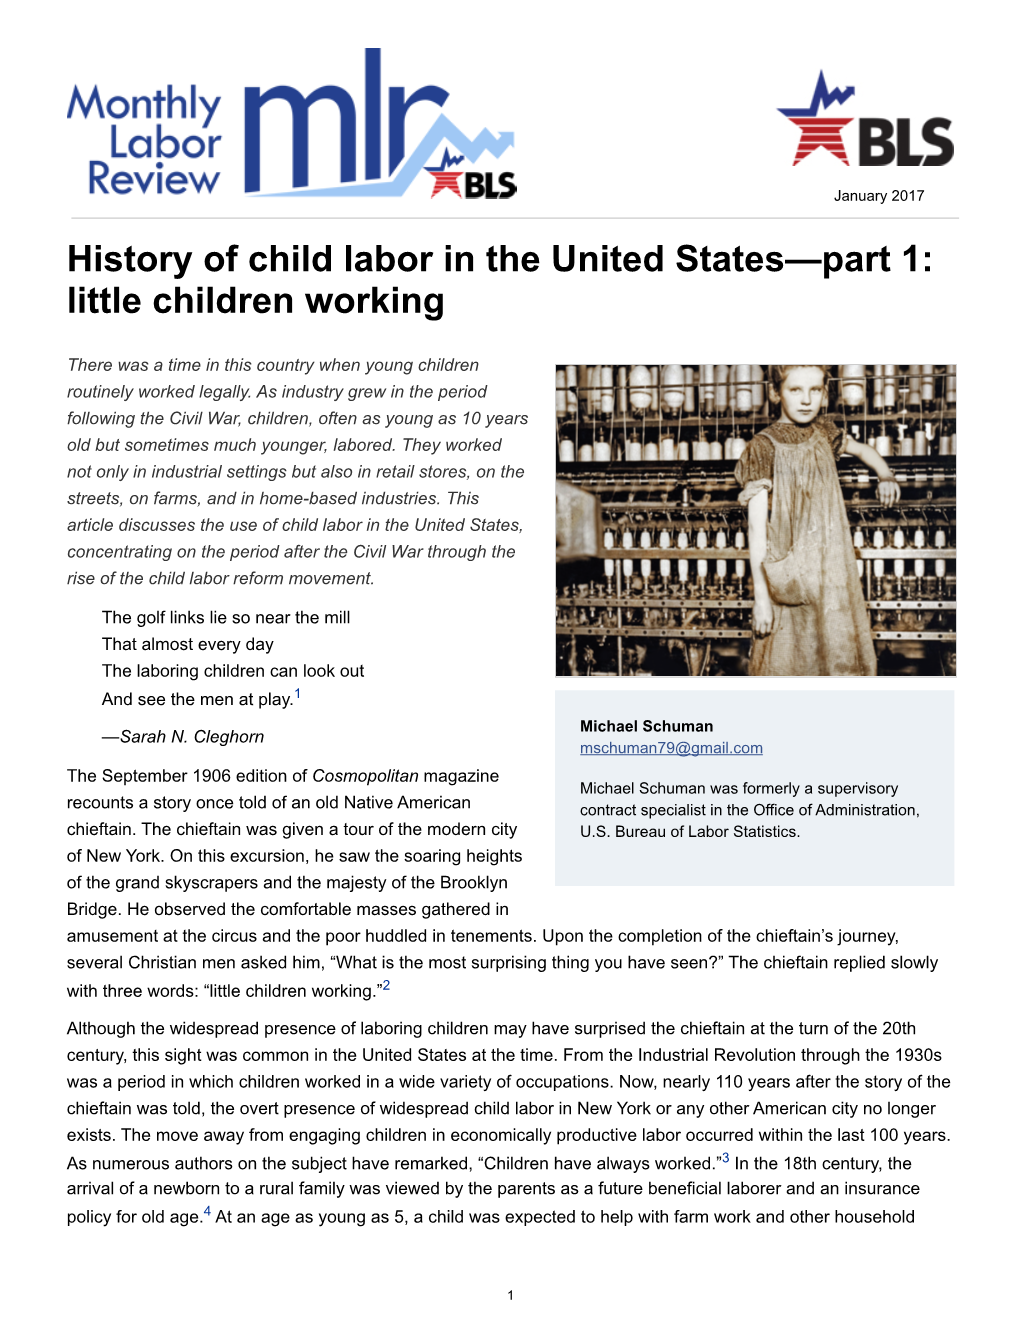 History of Child Labor in the United States—Part 1: Little Children Working